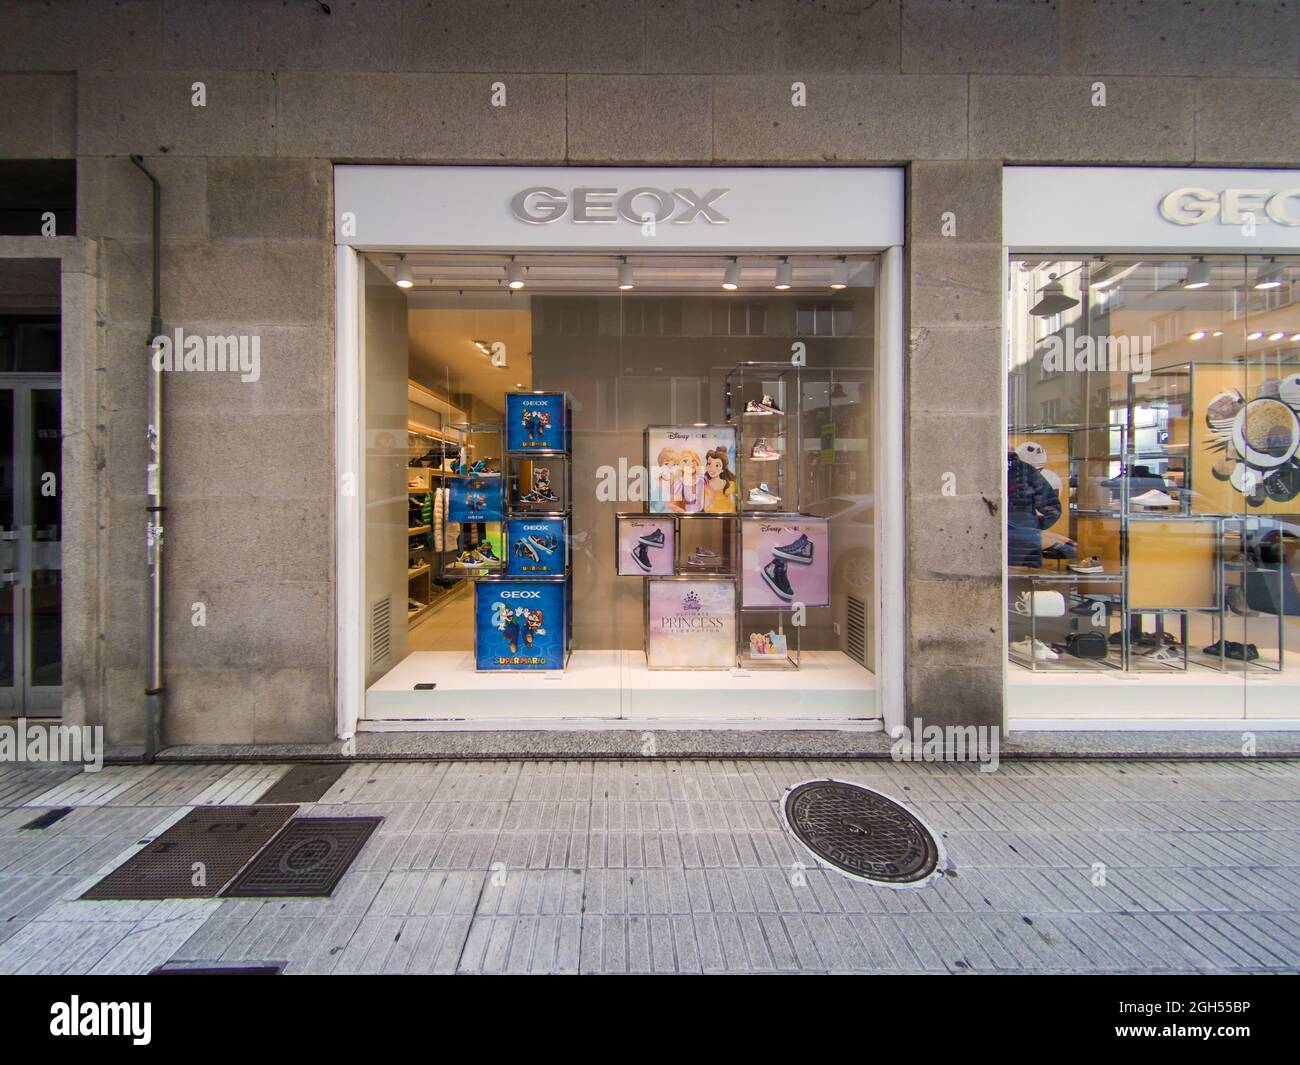 VIGO, SPAIN - Aug 23, 2021: The front store shop of the brand with sign, logo signage in Spain, Spanish style boutique Stock Photo - Alamy